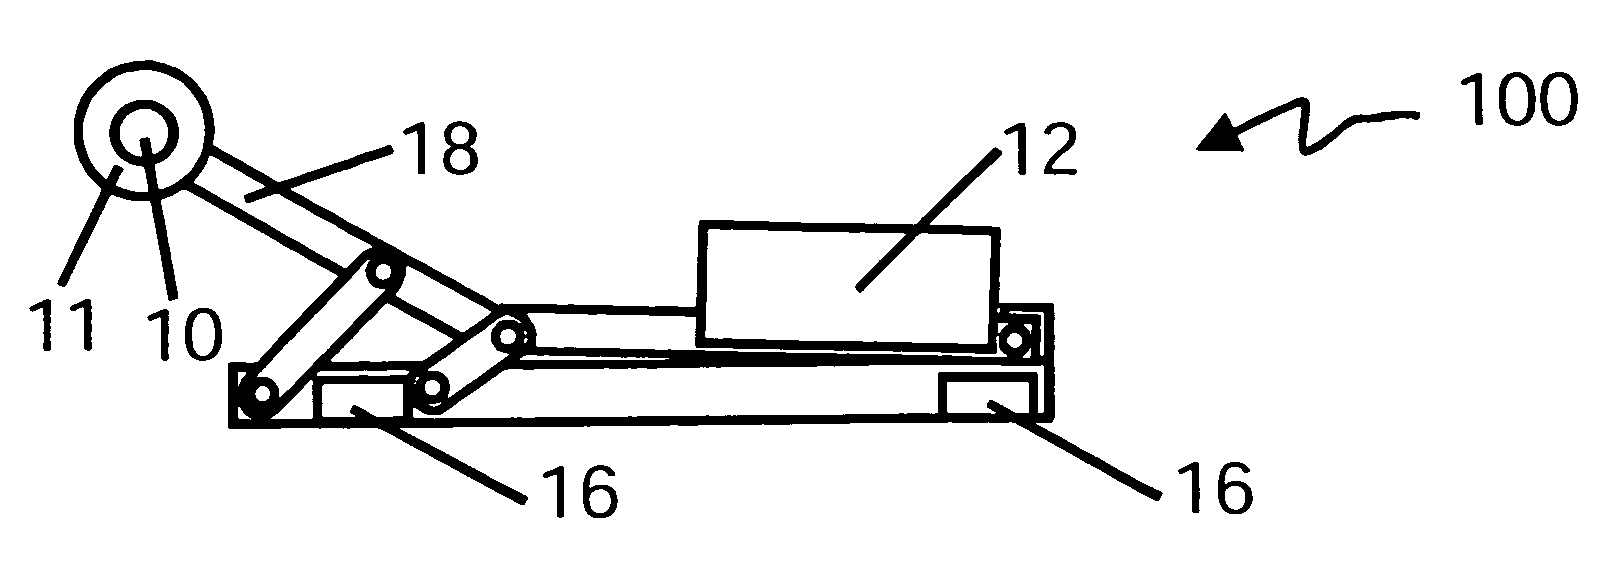 Electrically actuated lifting and transferring apparatus